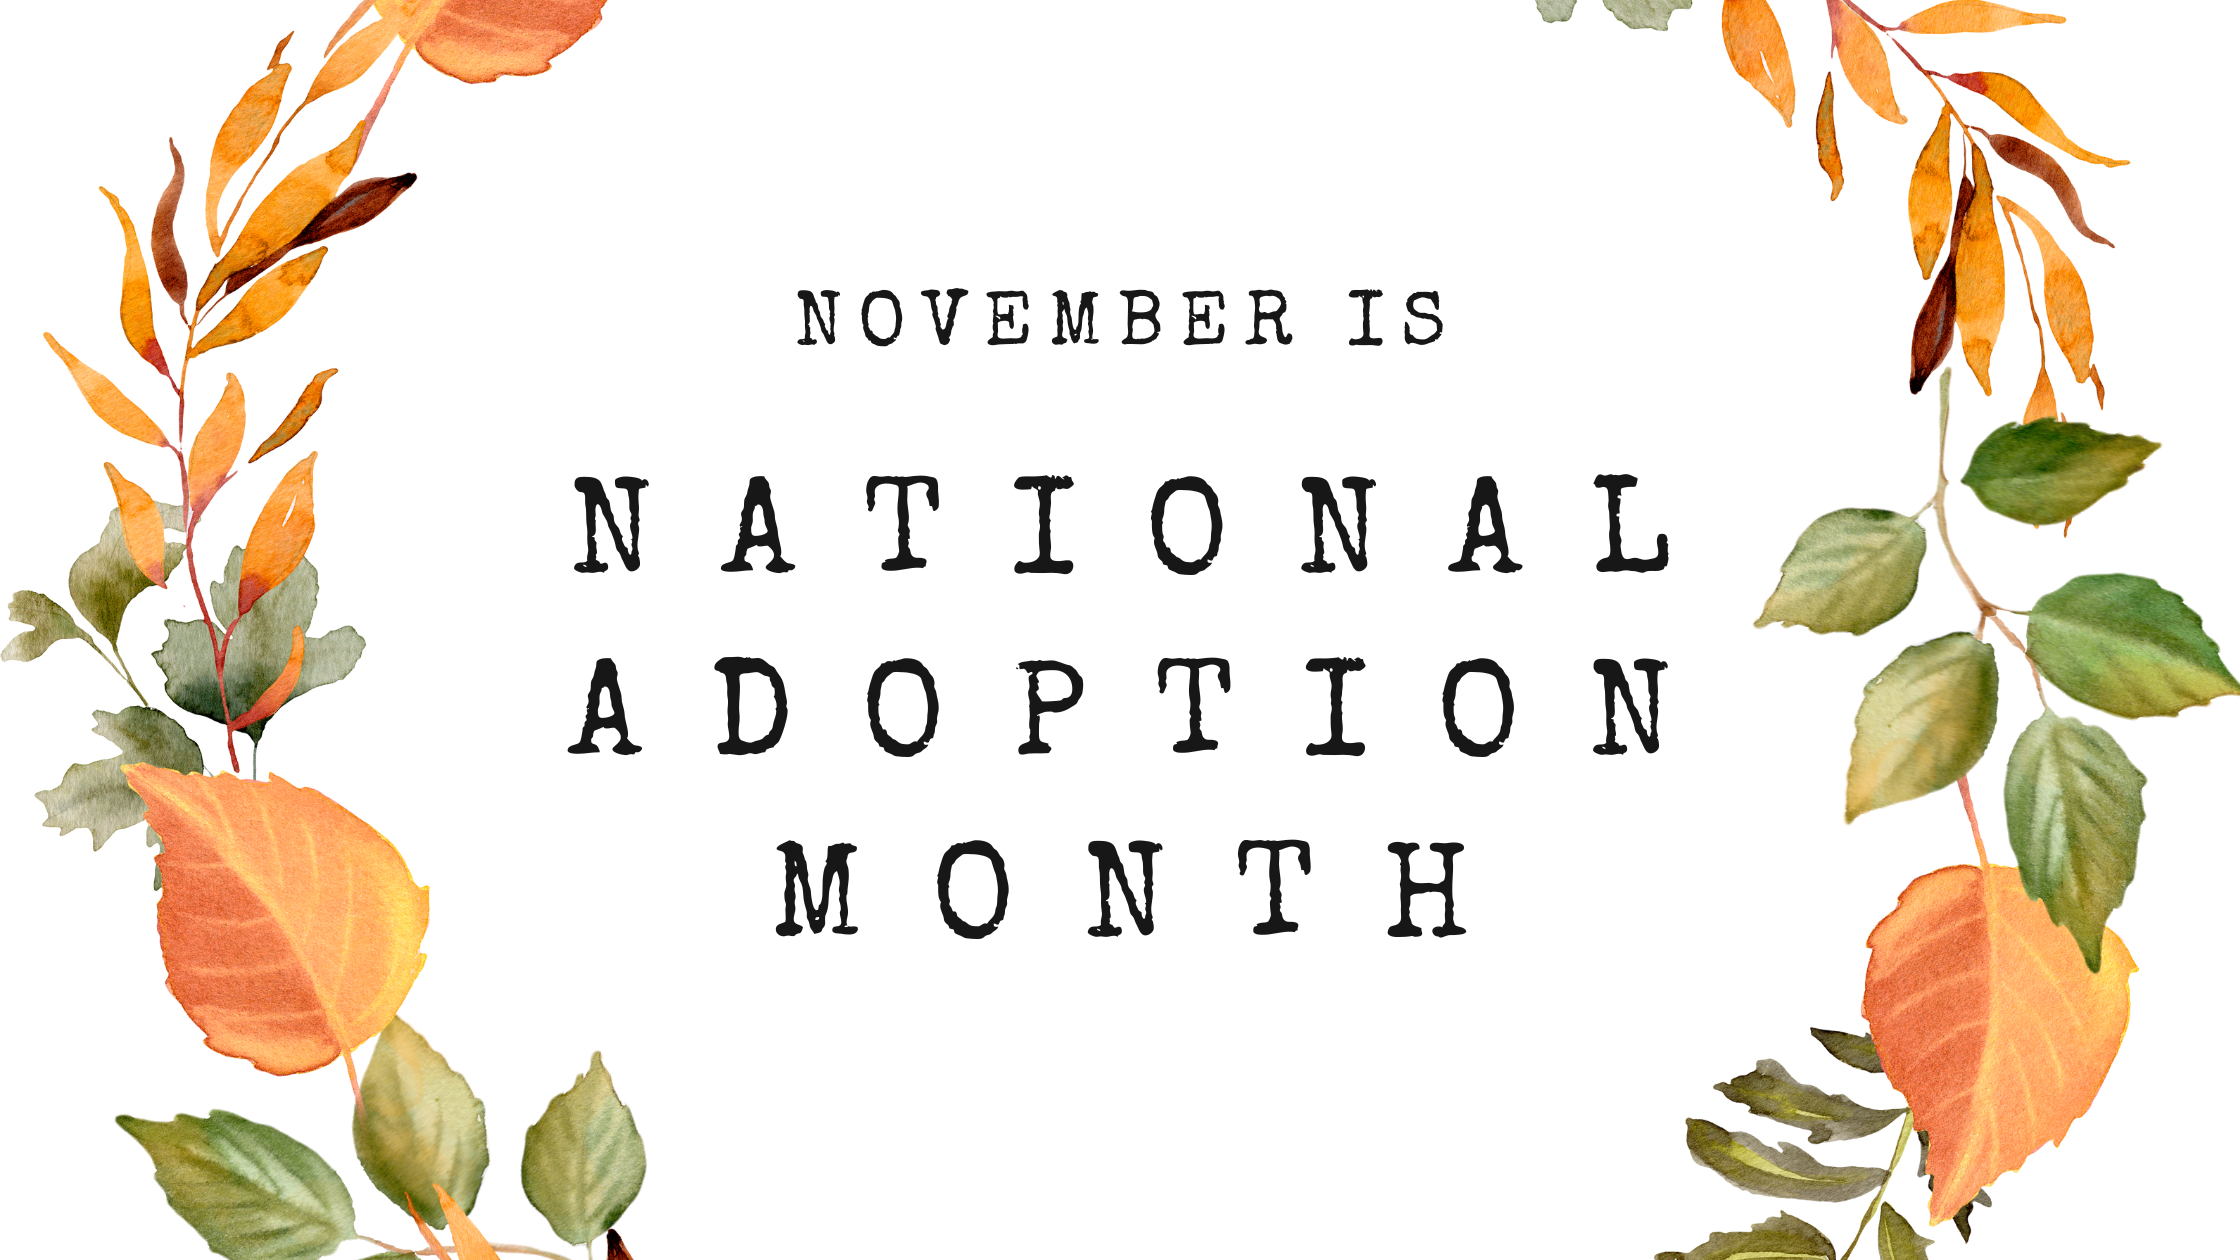 A graphic with leaves in fall colors, orange, red, brown, and green and text that reads "November is National Adoption Month"